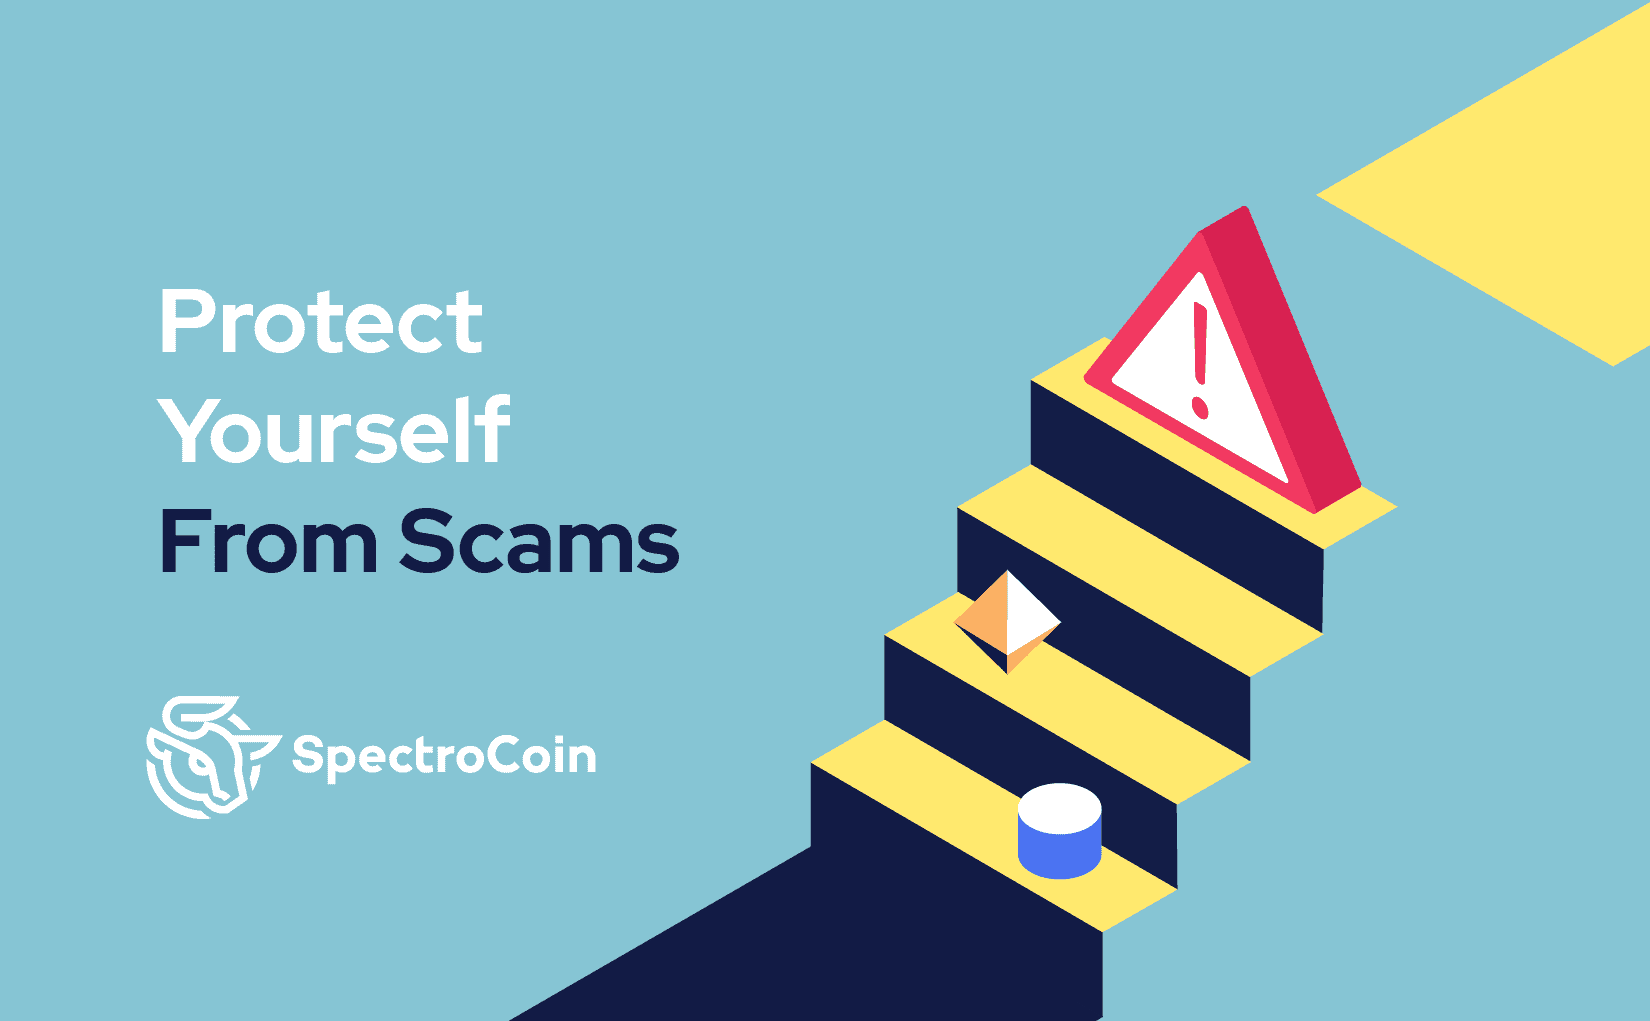 Read more on how to keep yourself safe from online scams.